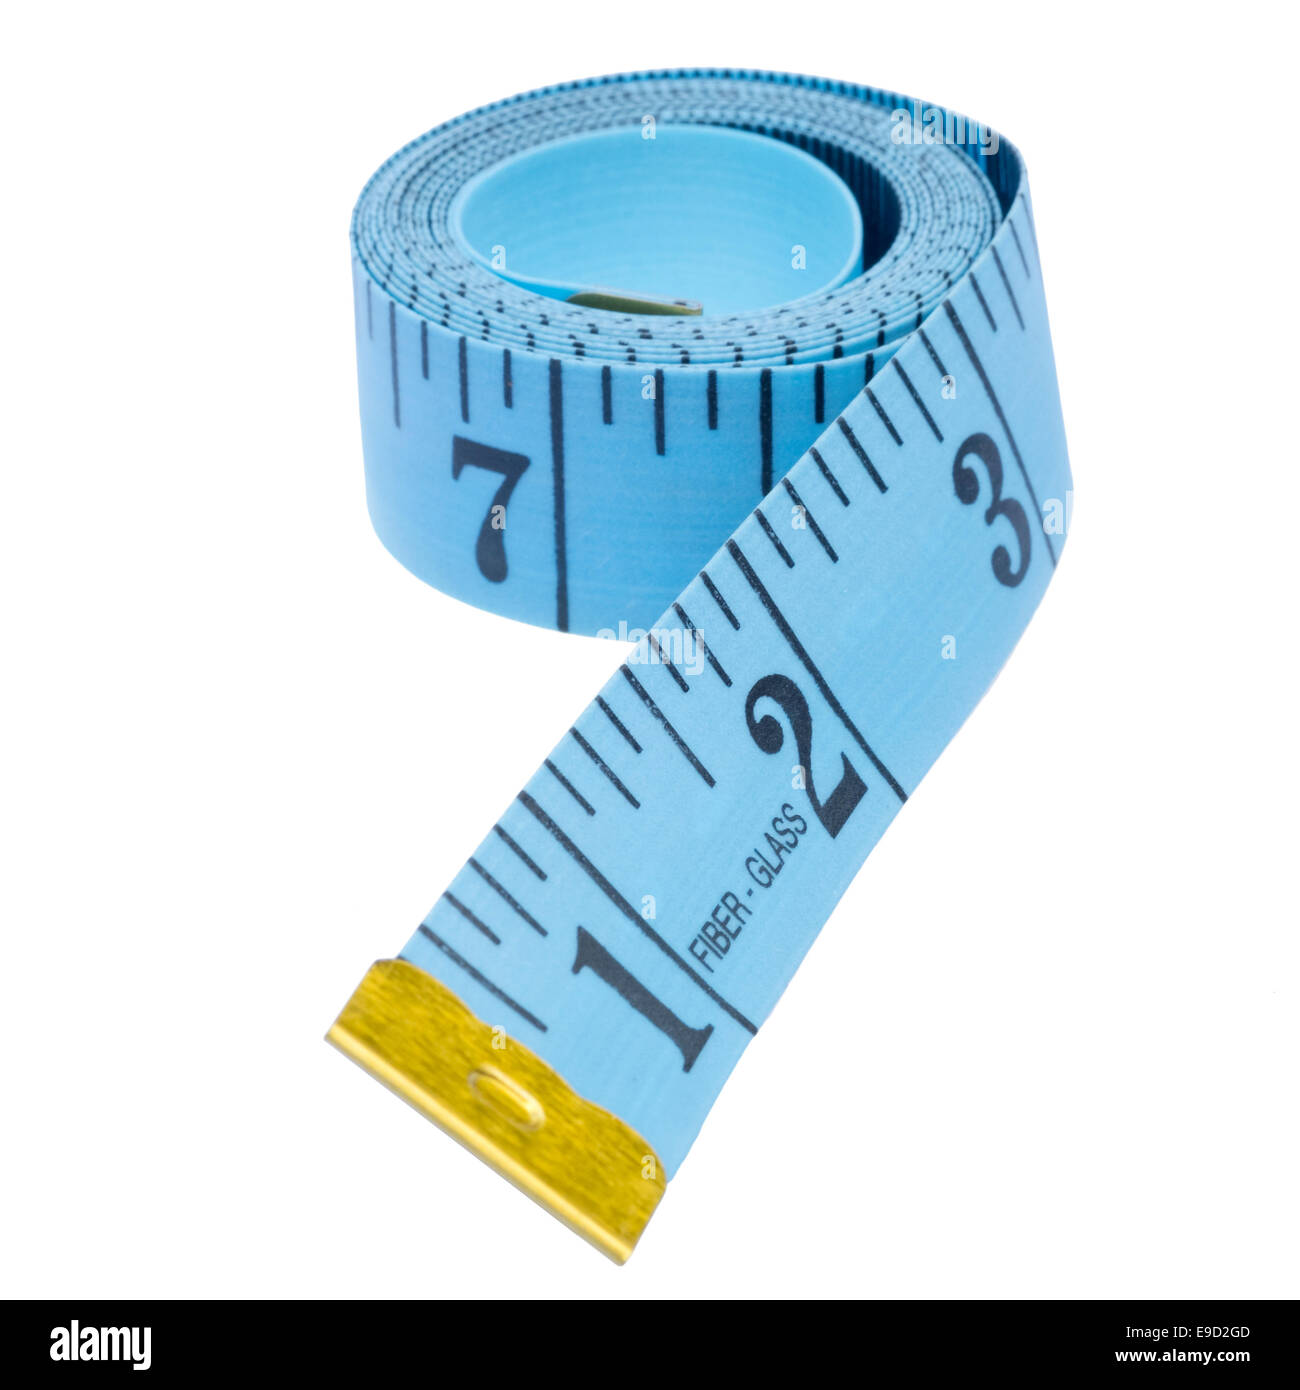 Imperial tailors tape measure, cut out or isolated against a white background. Stock Photo